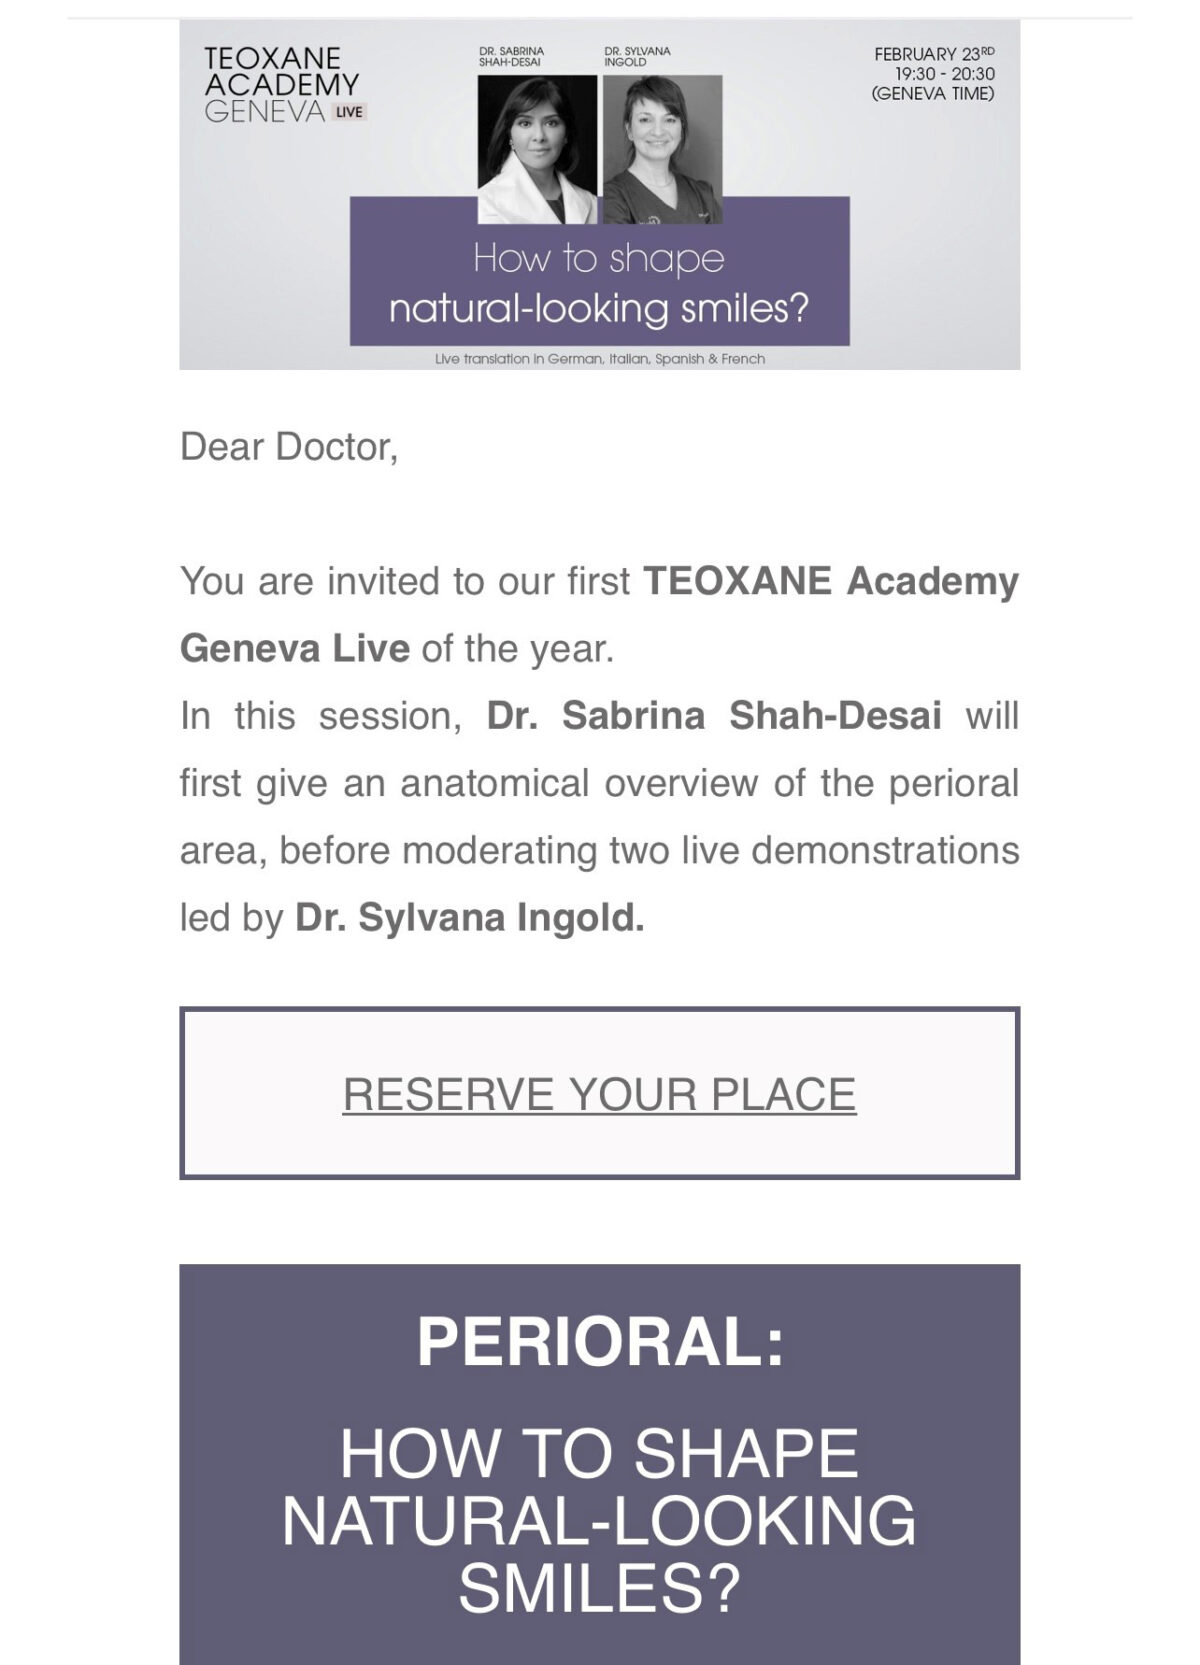 Teoxane Academy Geneva live demostrations led by Dr. Sylvana Ingold